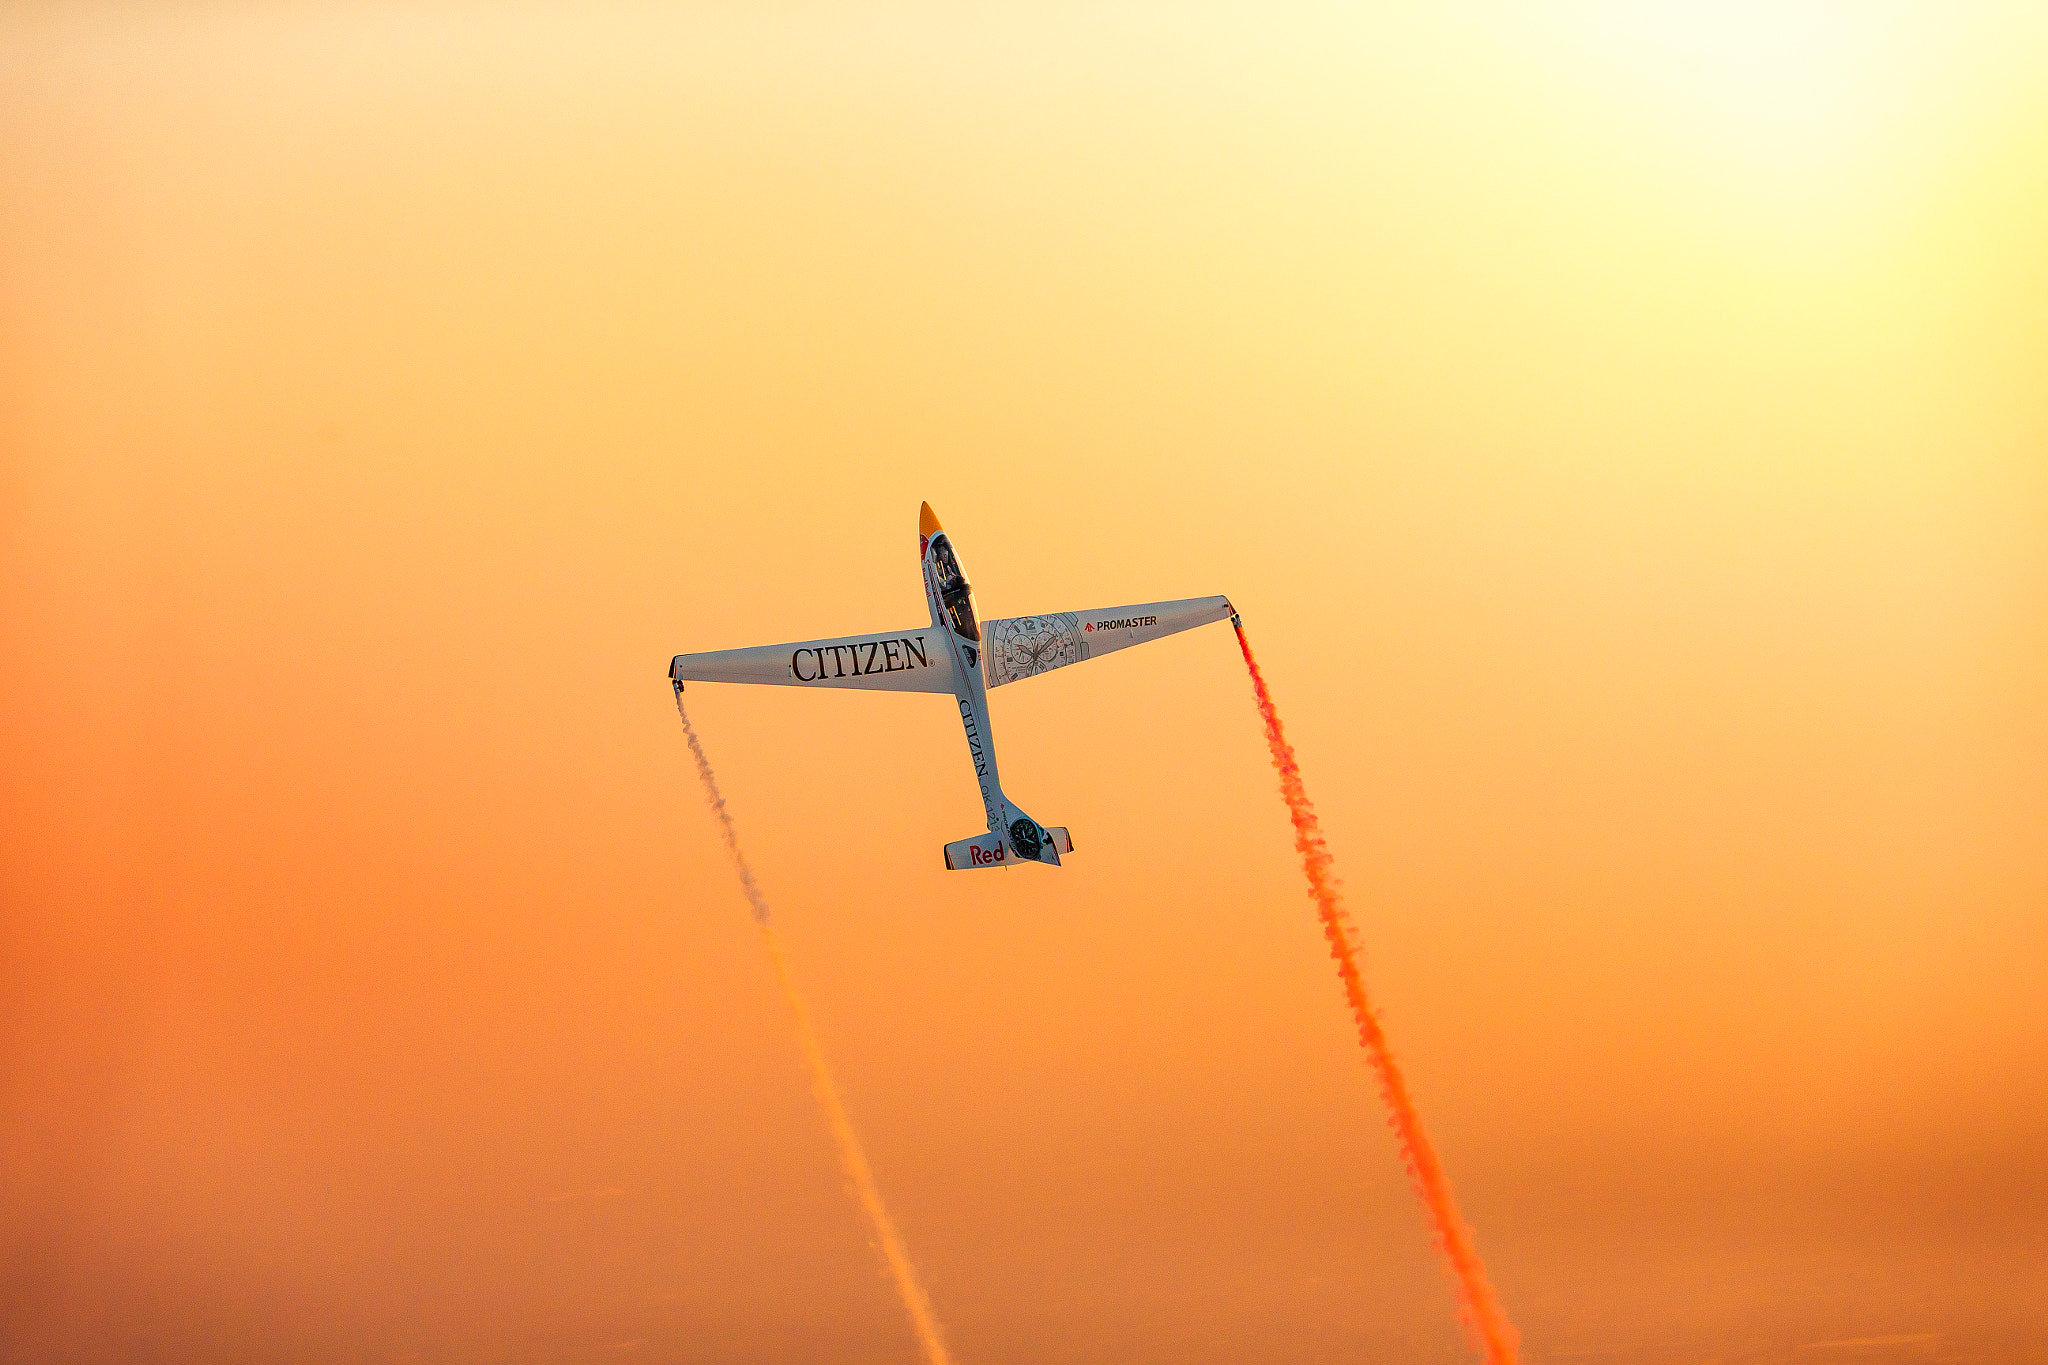 General 2048x1365 photography airplane airshows colored smoke glider smoke sky vehicle aircraft 500px